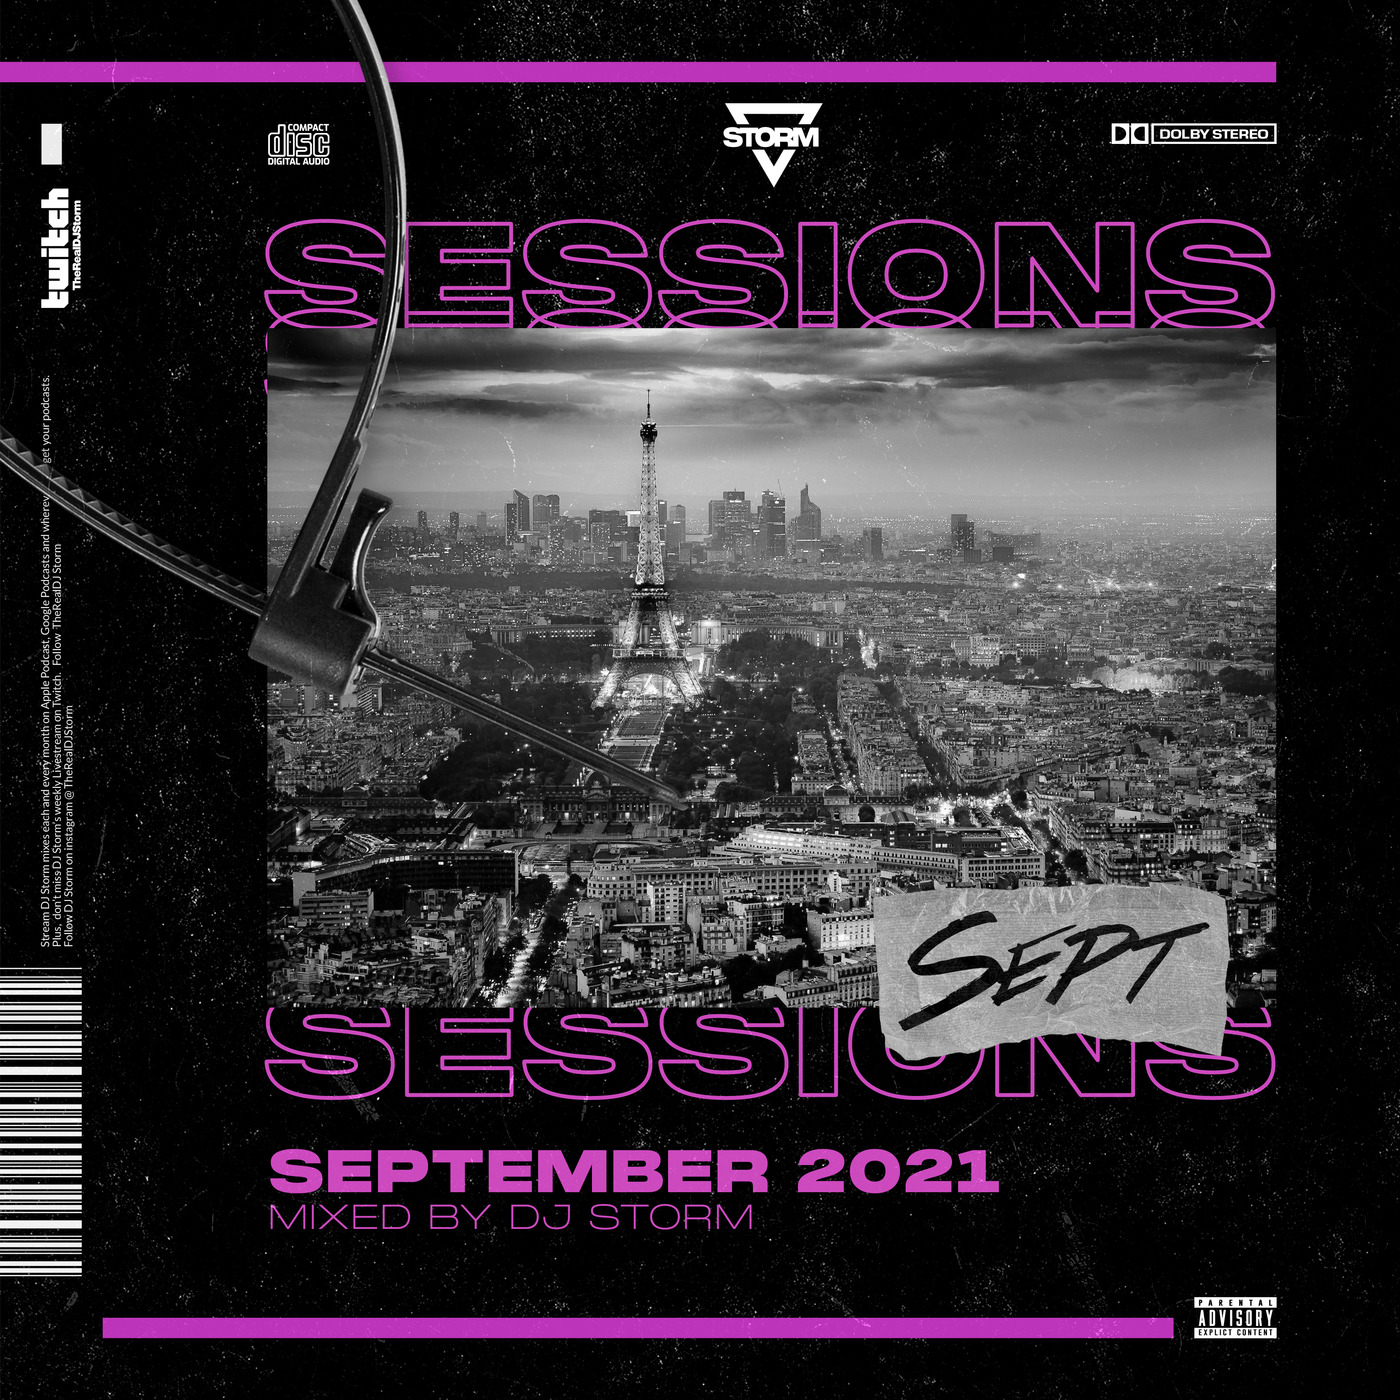 The Sessions: September 2021